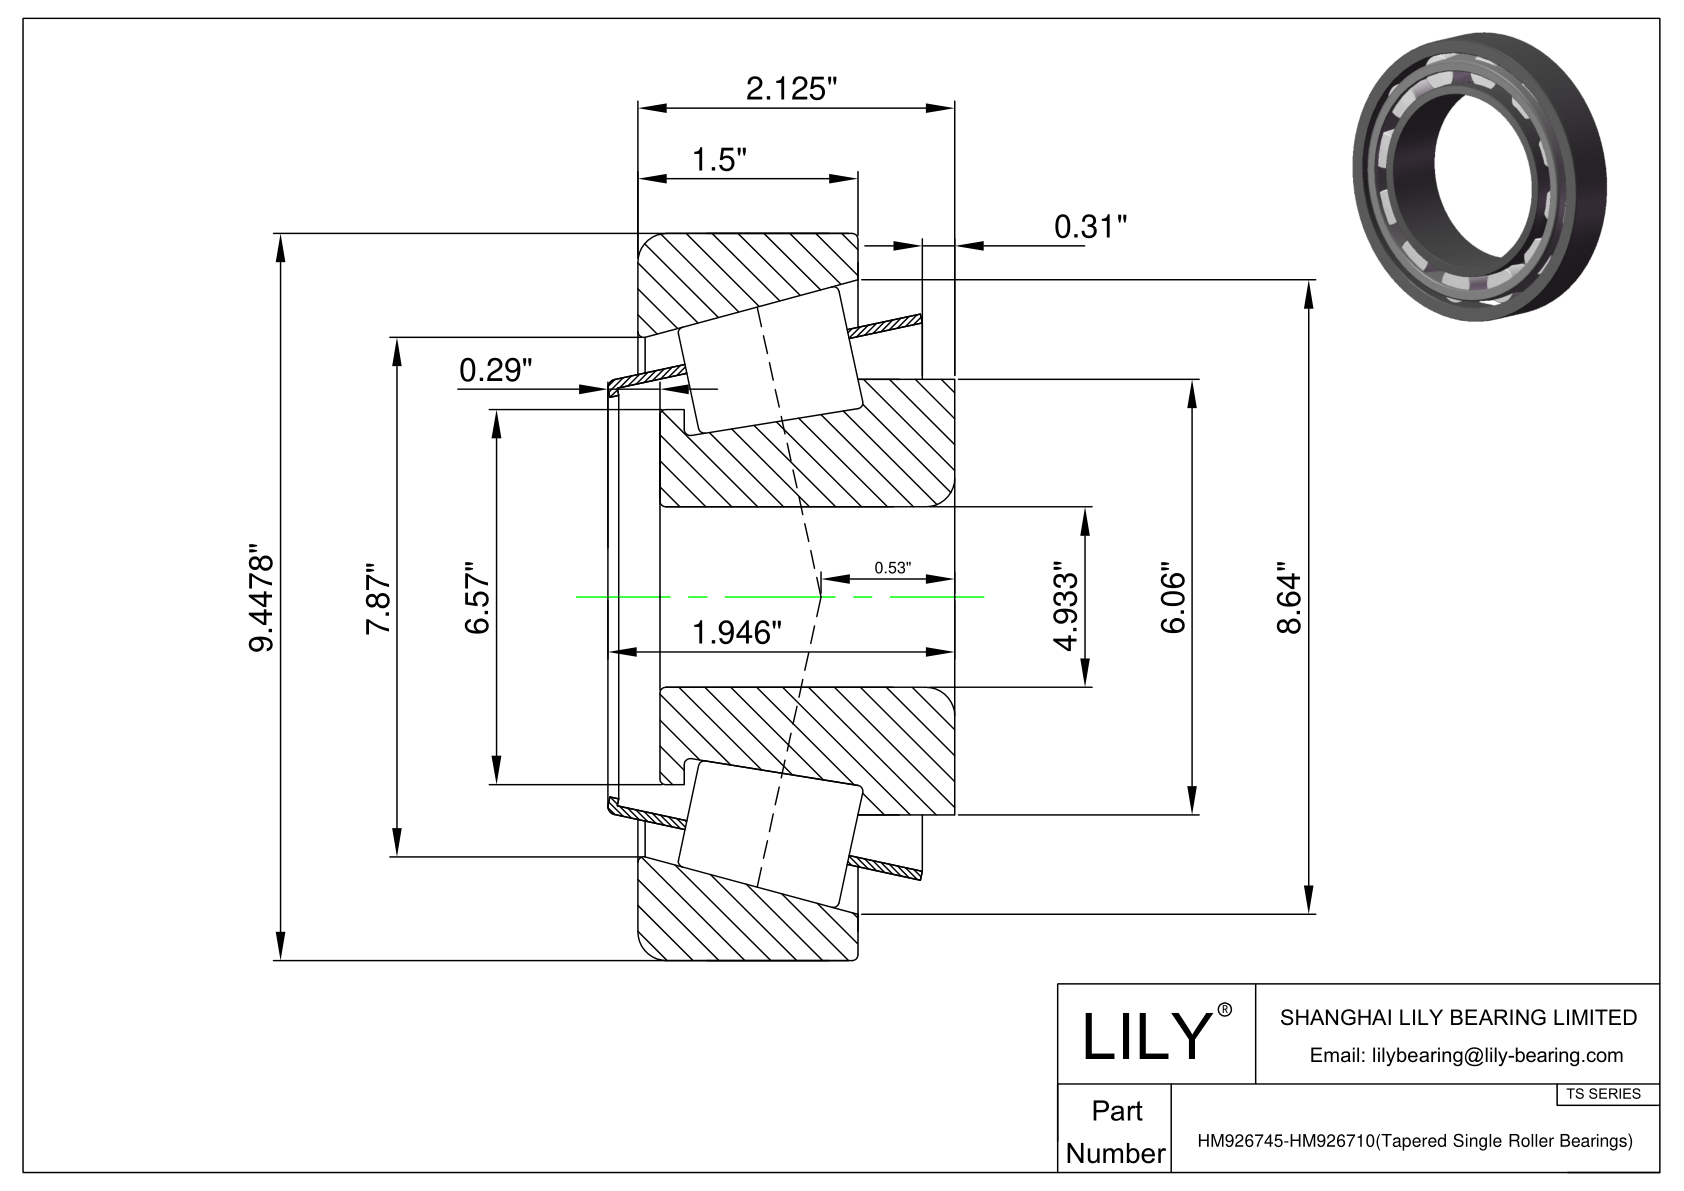 HM926745-HM926710 TS (Tapered Single Roller Bearings) (Imperial) cad drawing